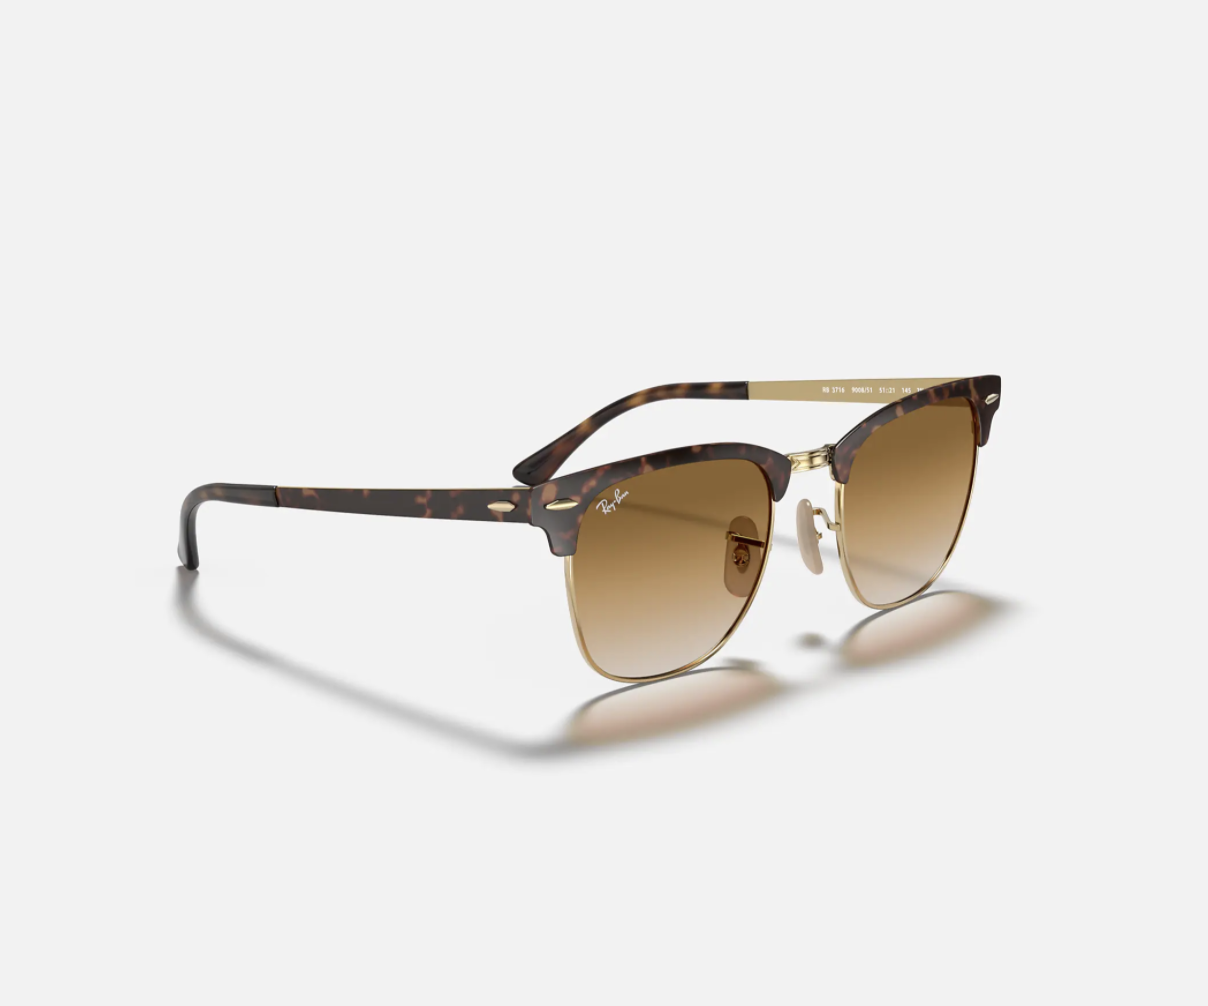  Ray Ban Clubmaster Metal frames in Tortoise